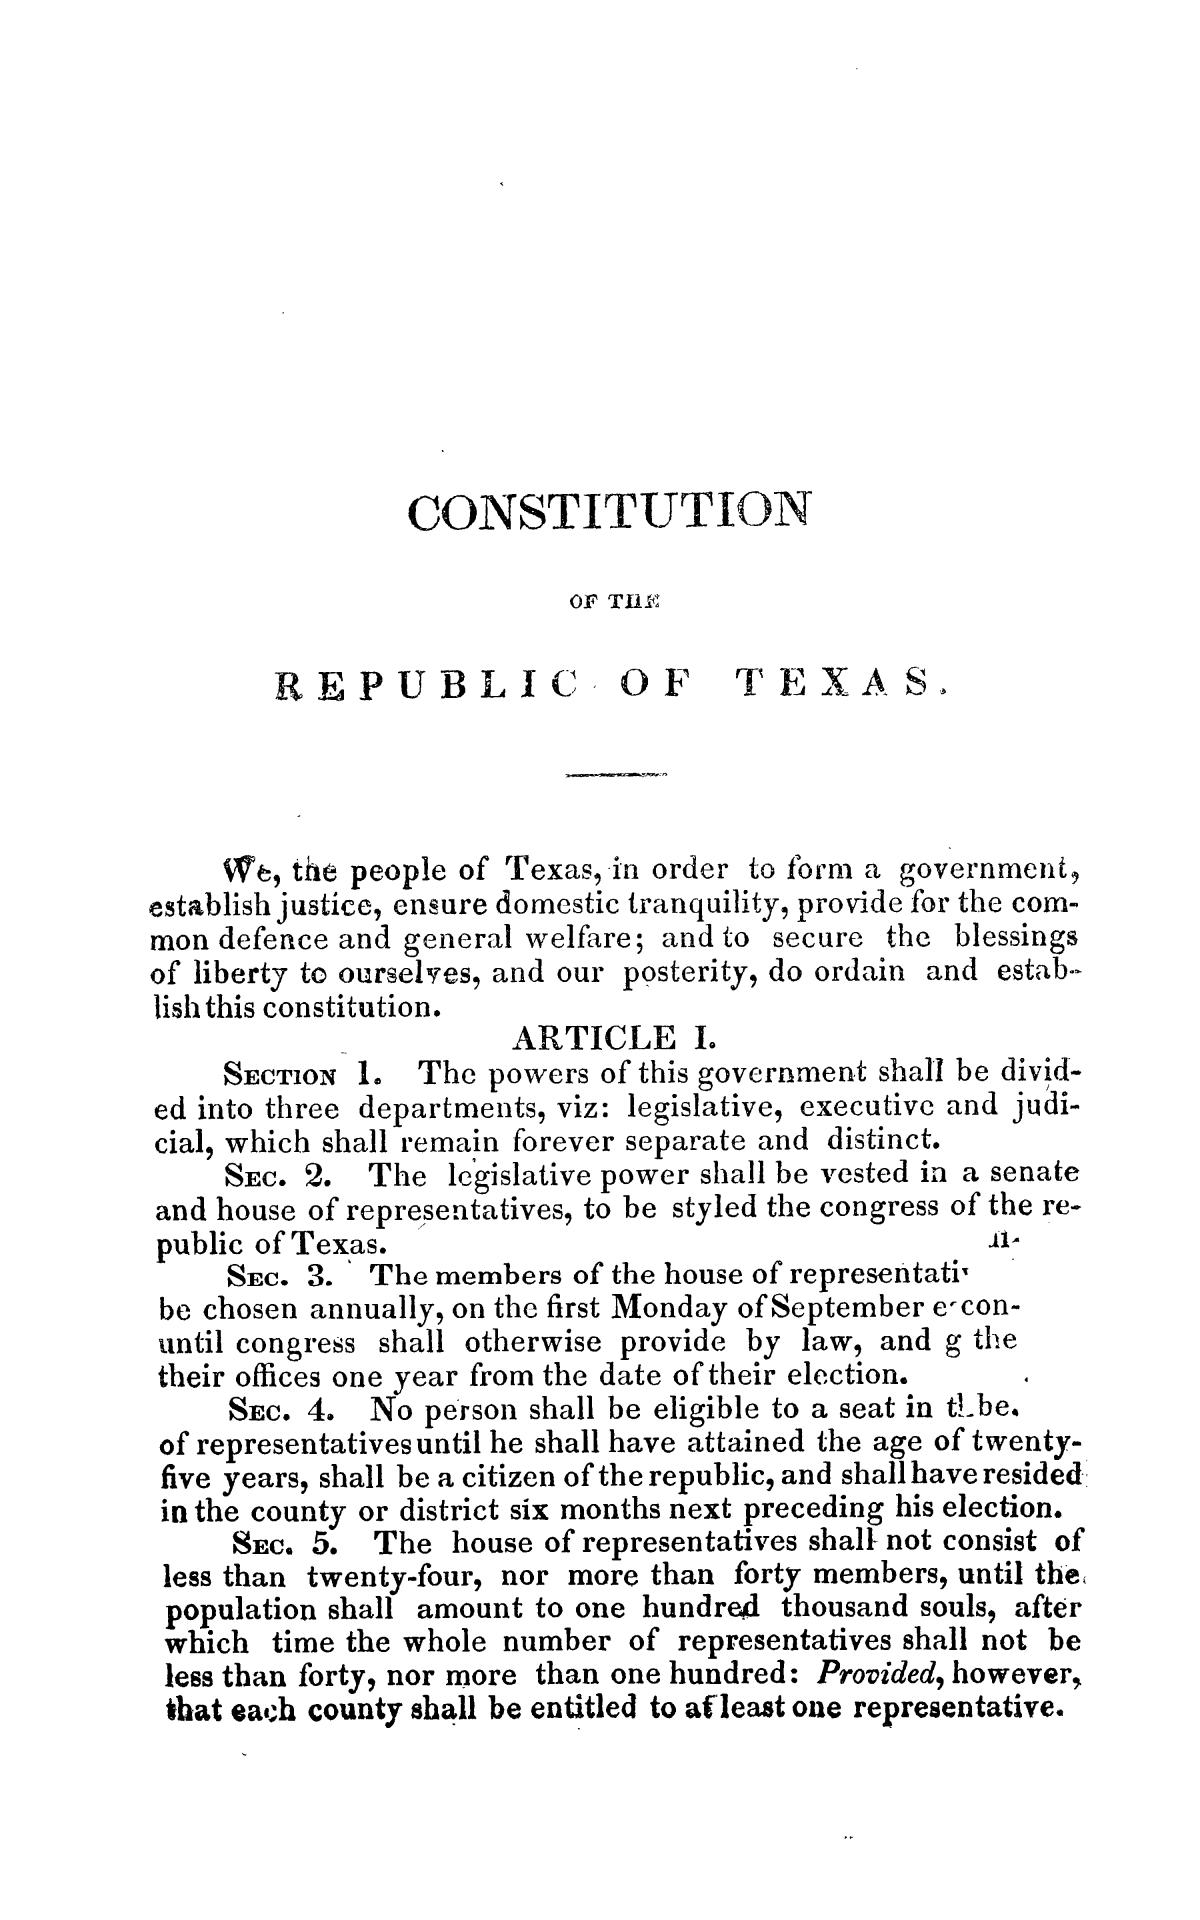 Laws of the Republic of Texas, in two volumes.  Volume 01.
                                                
                                                    9
                                                